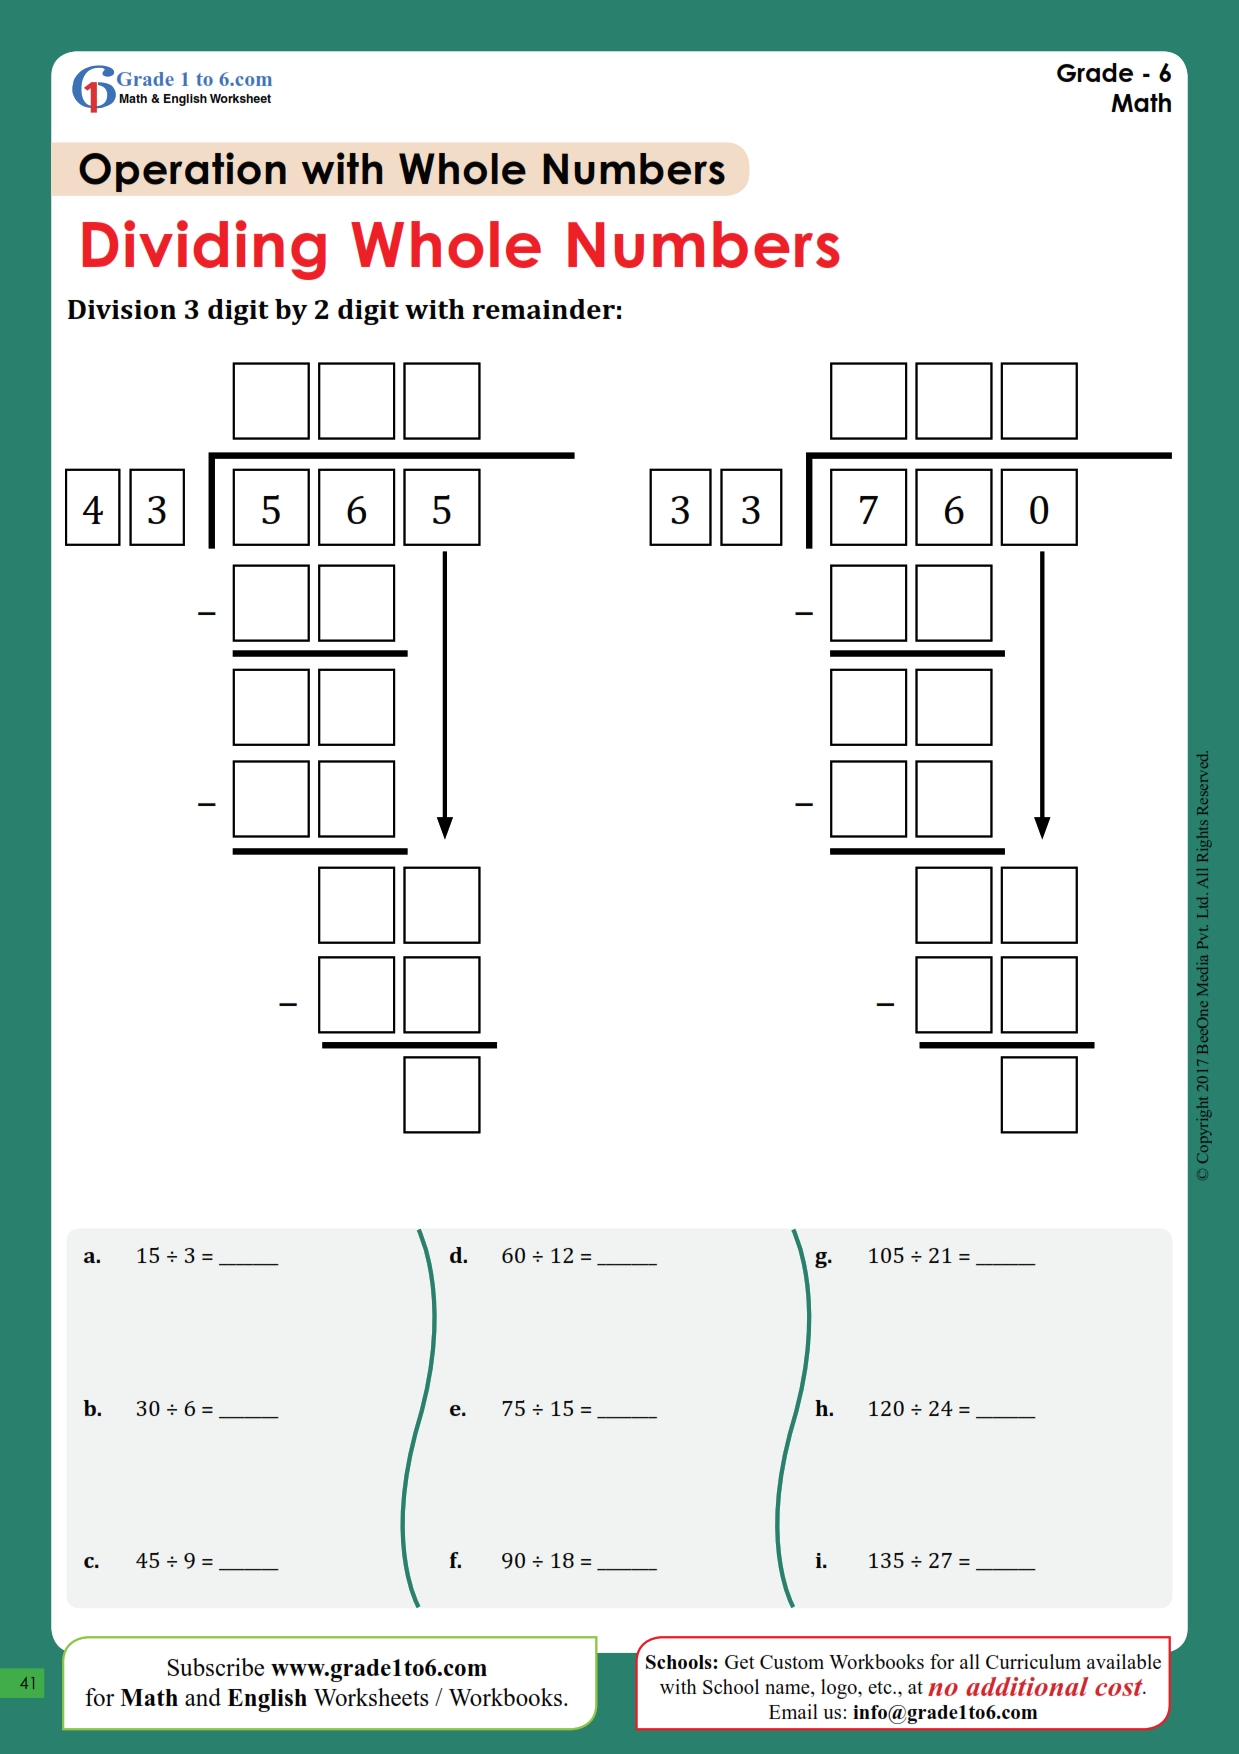 Dividing Whole Numbers Worksheet Grade 6